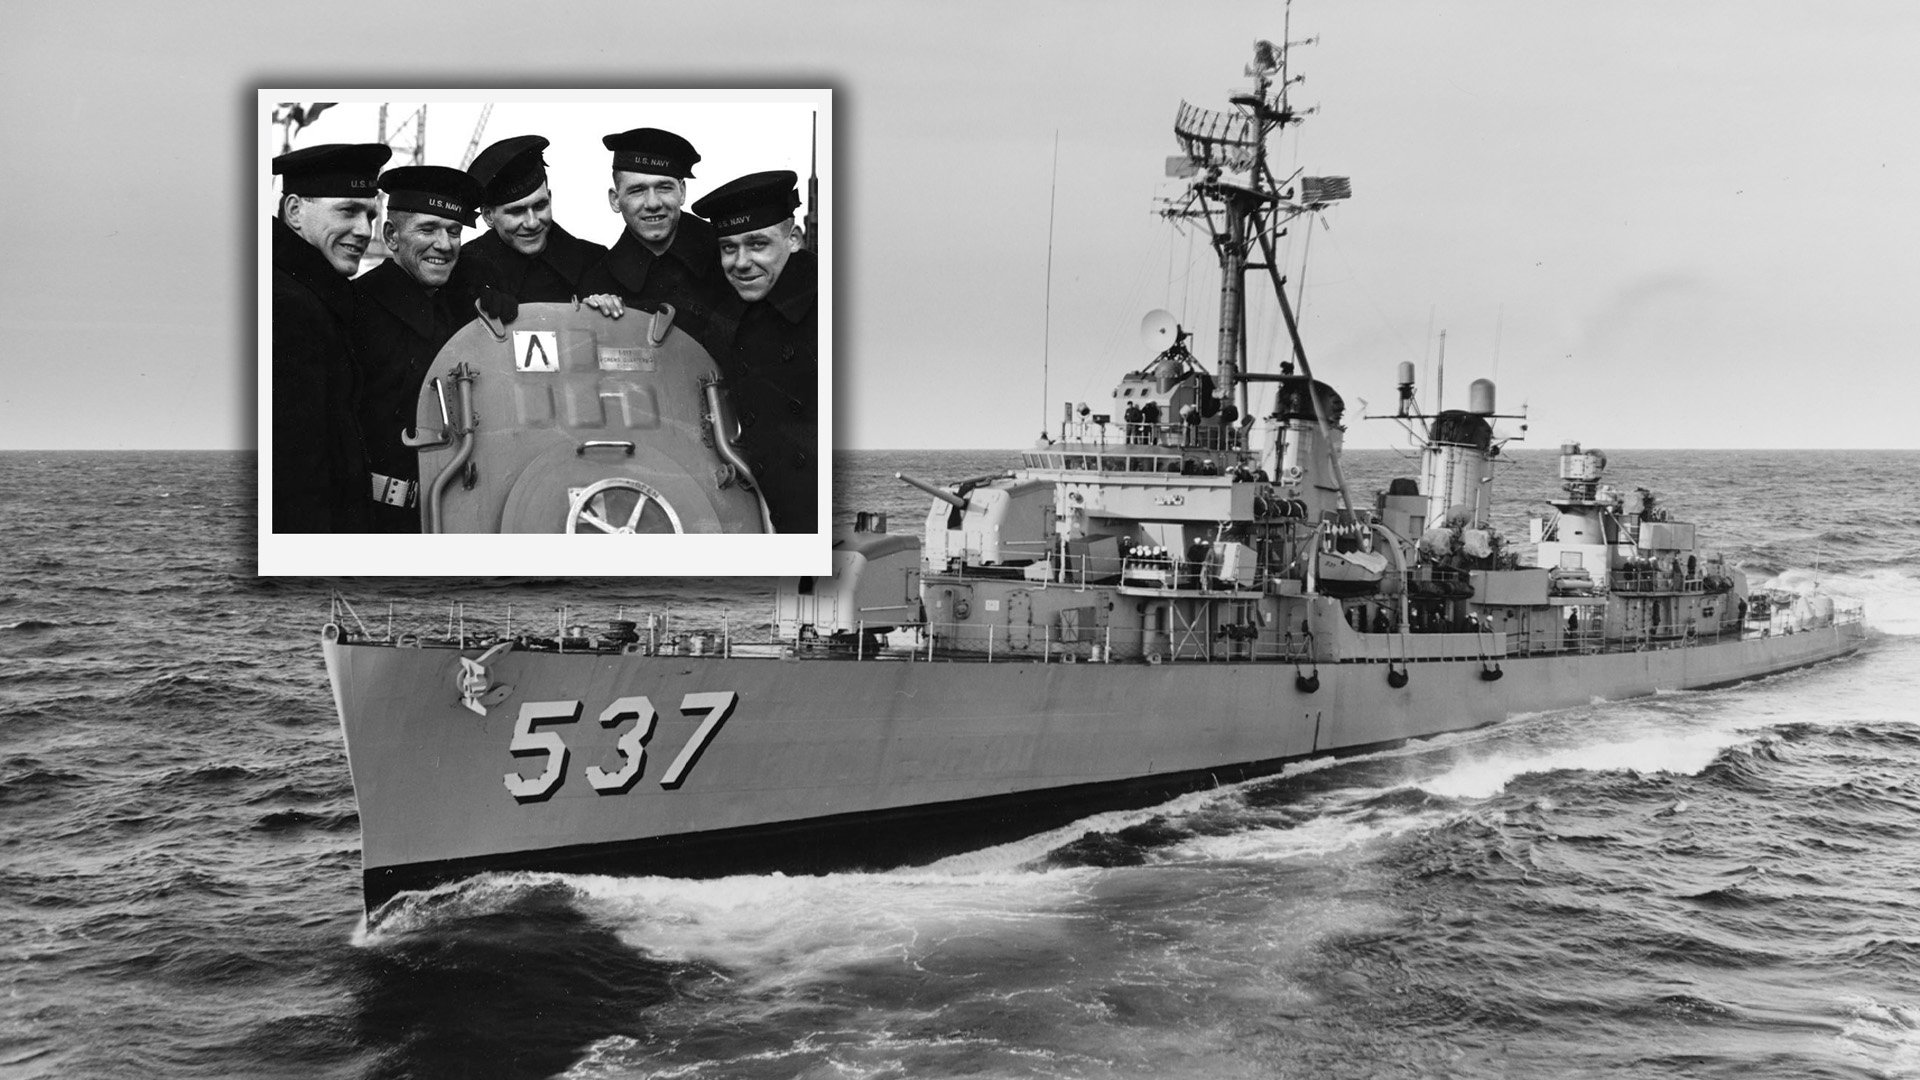 The five Sullivan brothers lost their lives while serving in World War II. The USS The Sullivans (DD-537), a Fletcher-class destroyer, pictured here in 1962, was named in their honor. Wikimedia Commons photos. Composite by Coffee or Die Magazine.